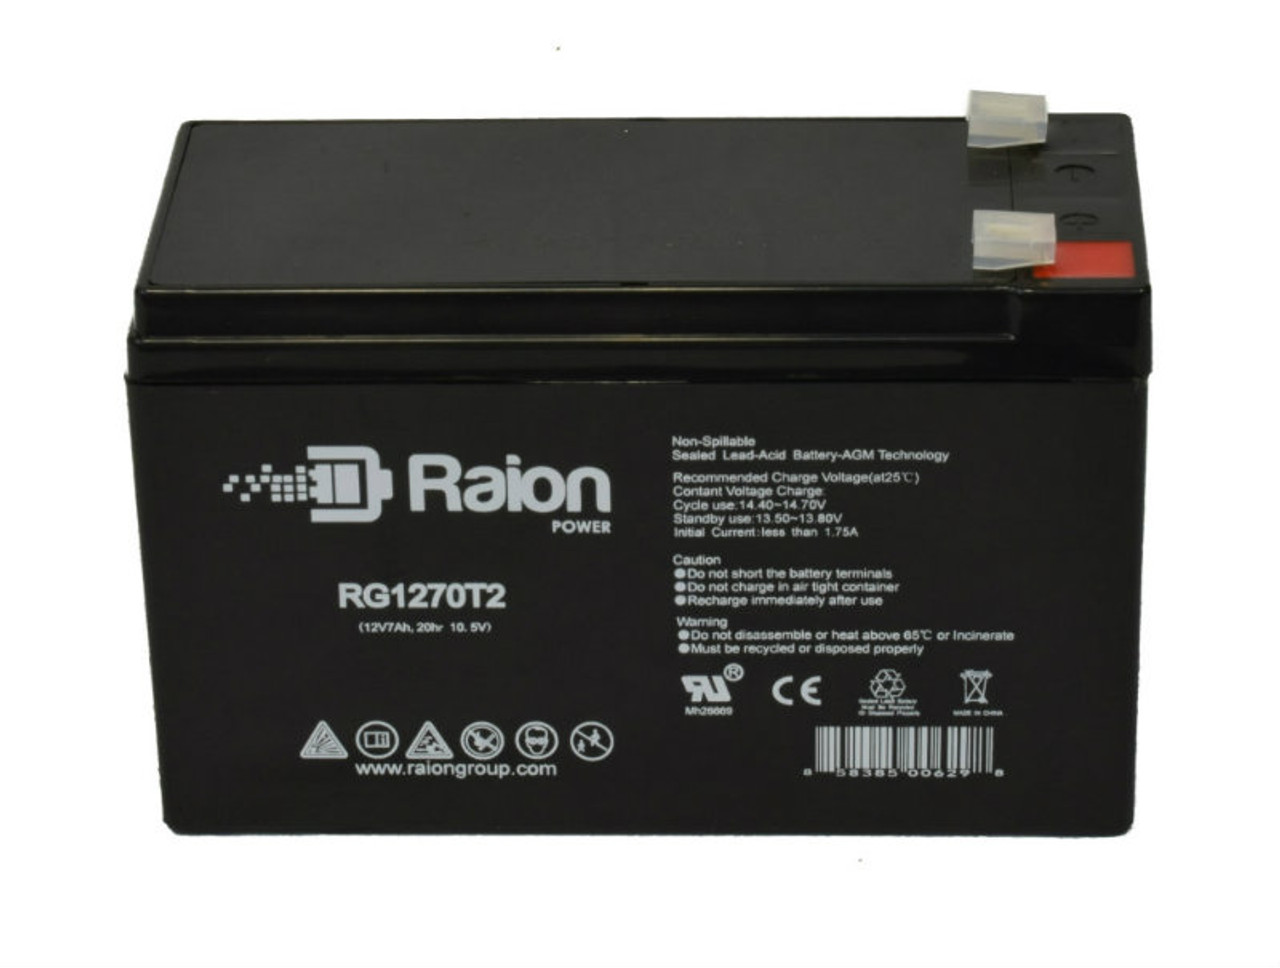 Raion Power RG1270T2 12V 7Ah Lead Acid Battery for Razor 13116219 E300S Electric Scooter Seated White